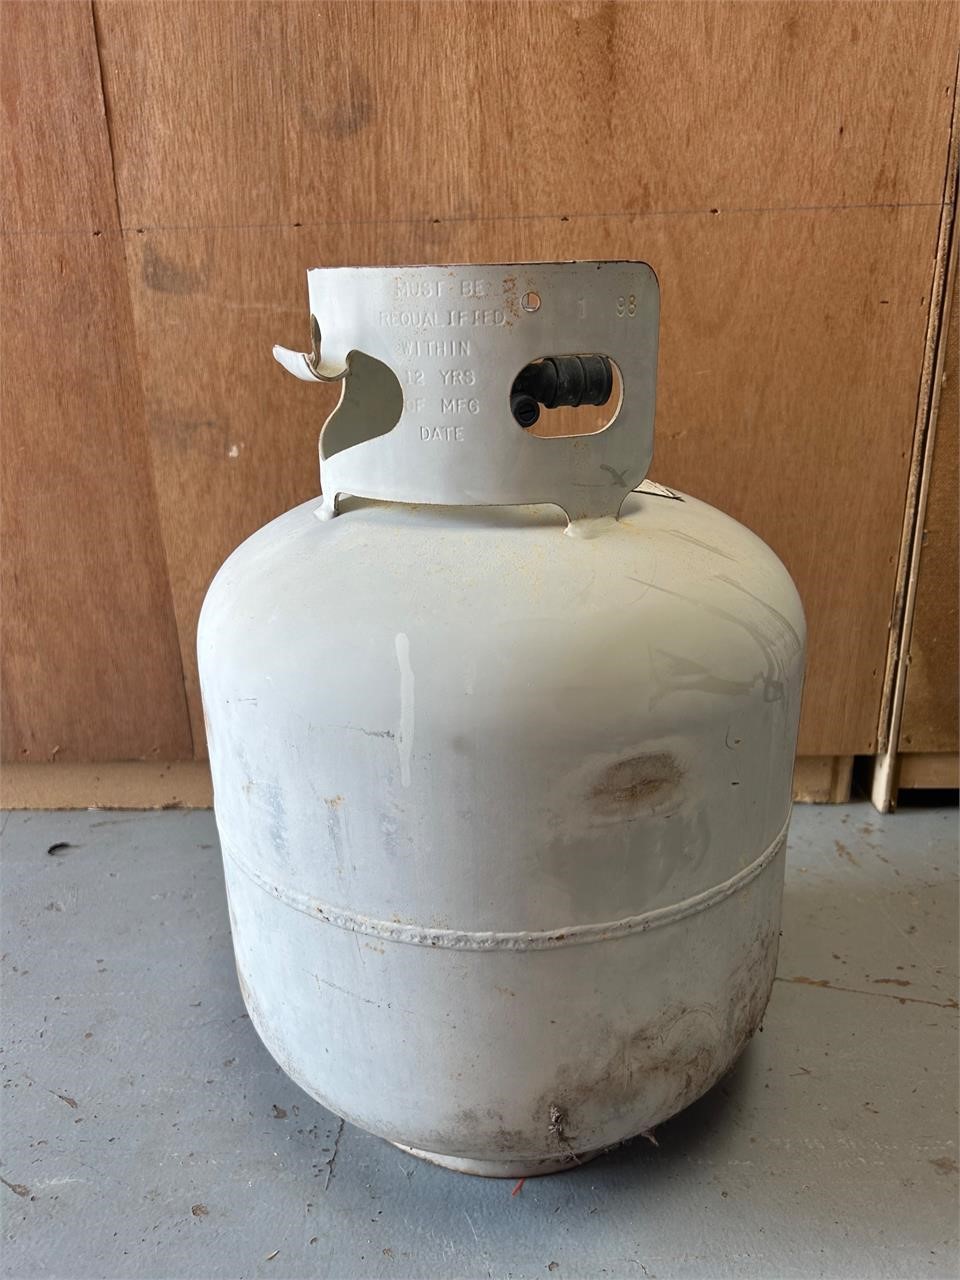 Partially full Propane Can